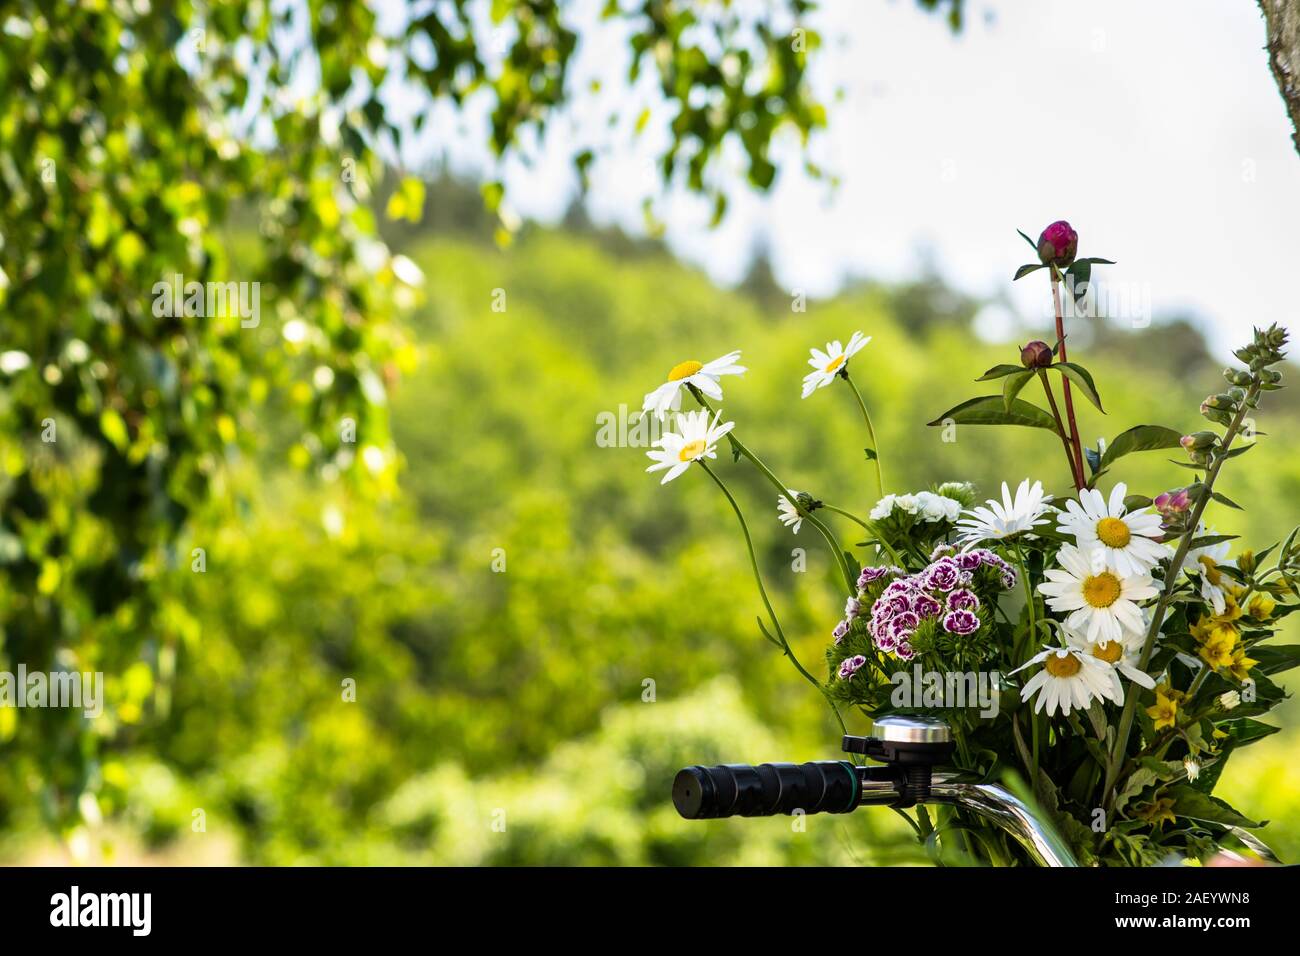 Bunch of flowers in a basket of bike with the handlebars on a blurry green garden background Stock Photo